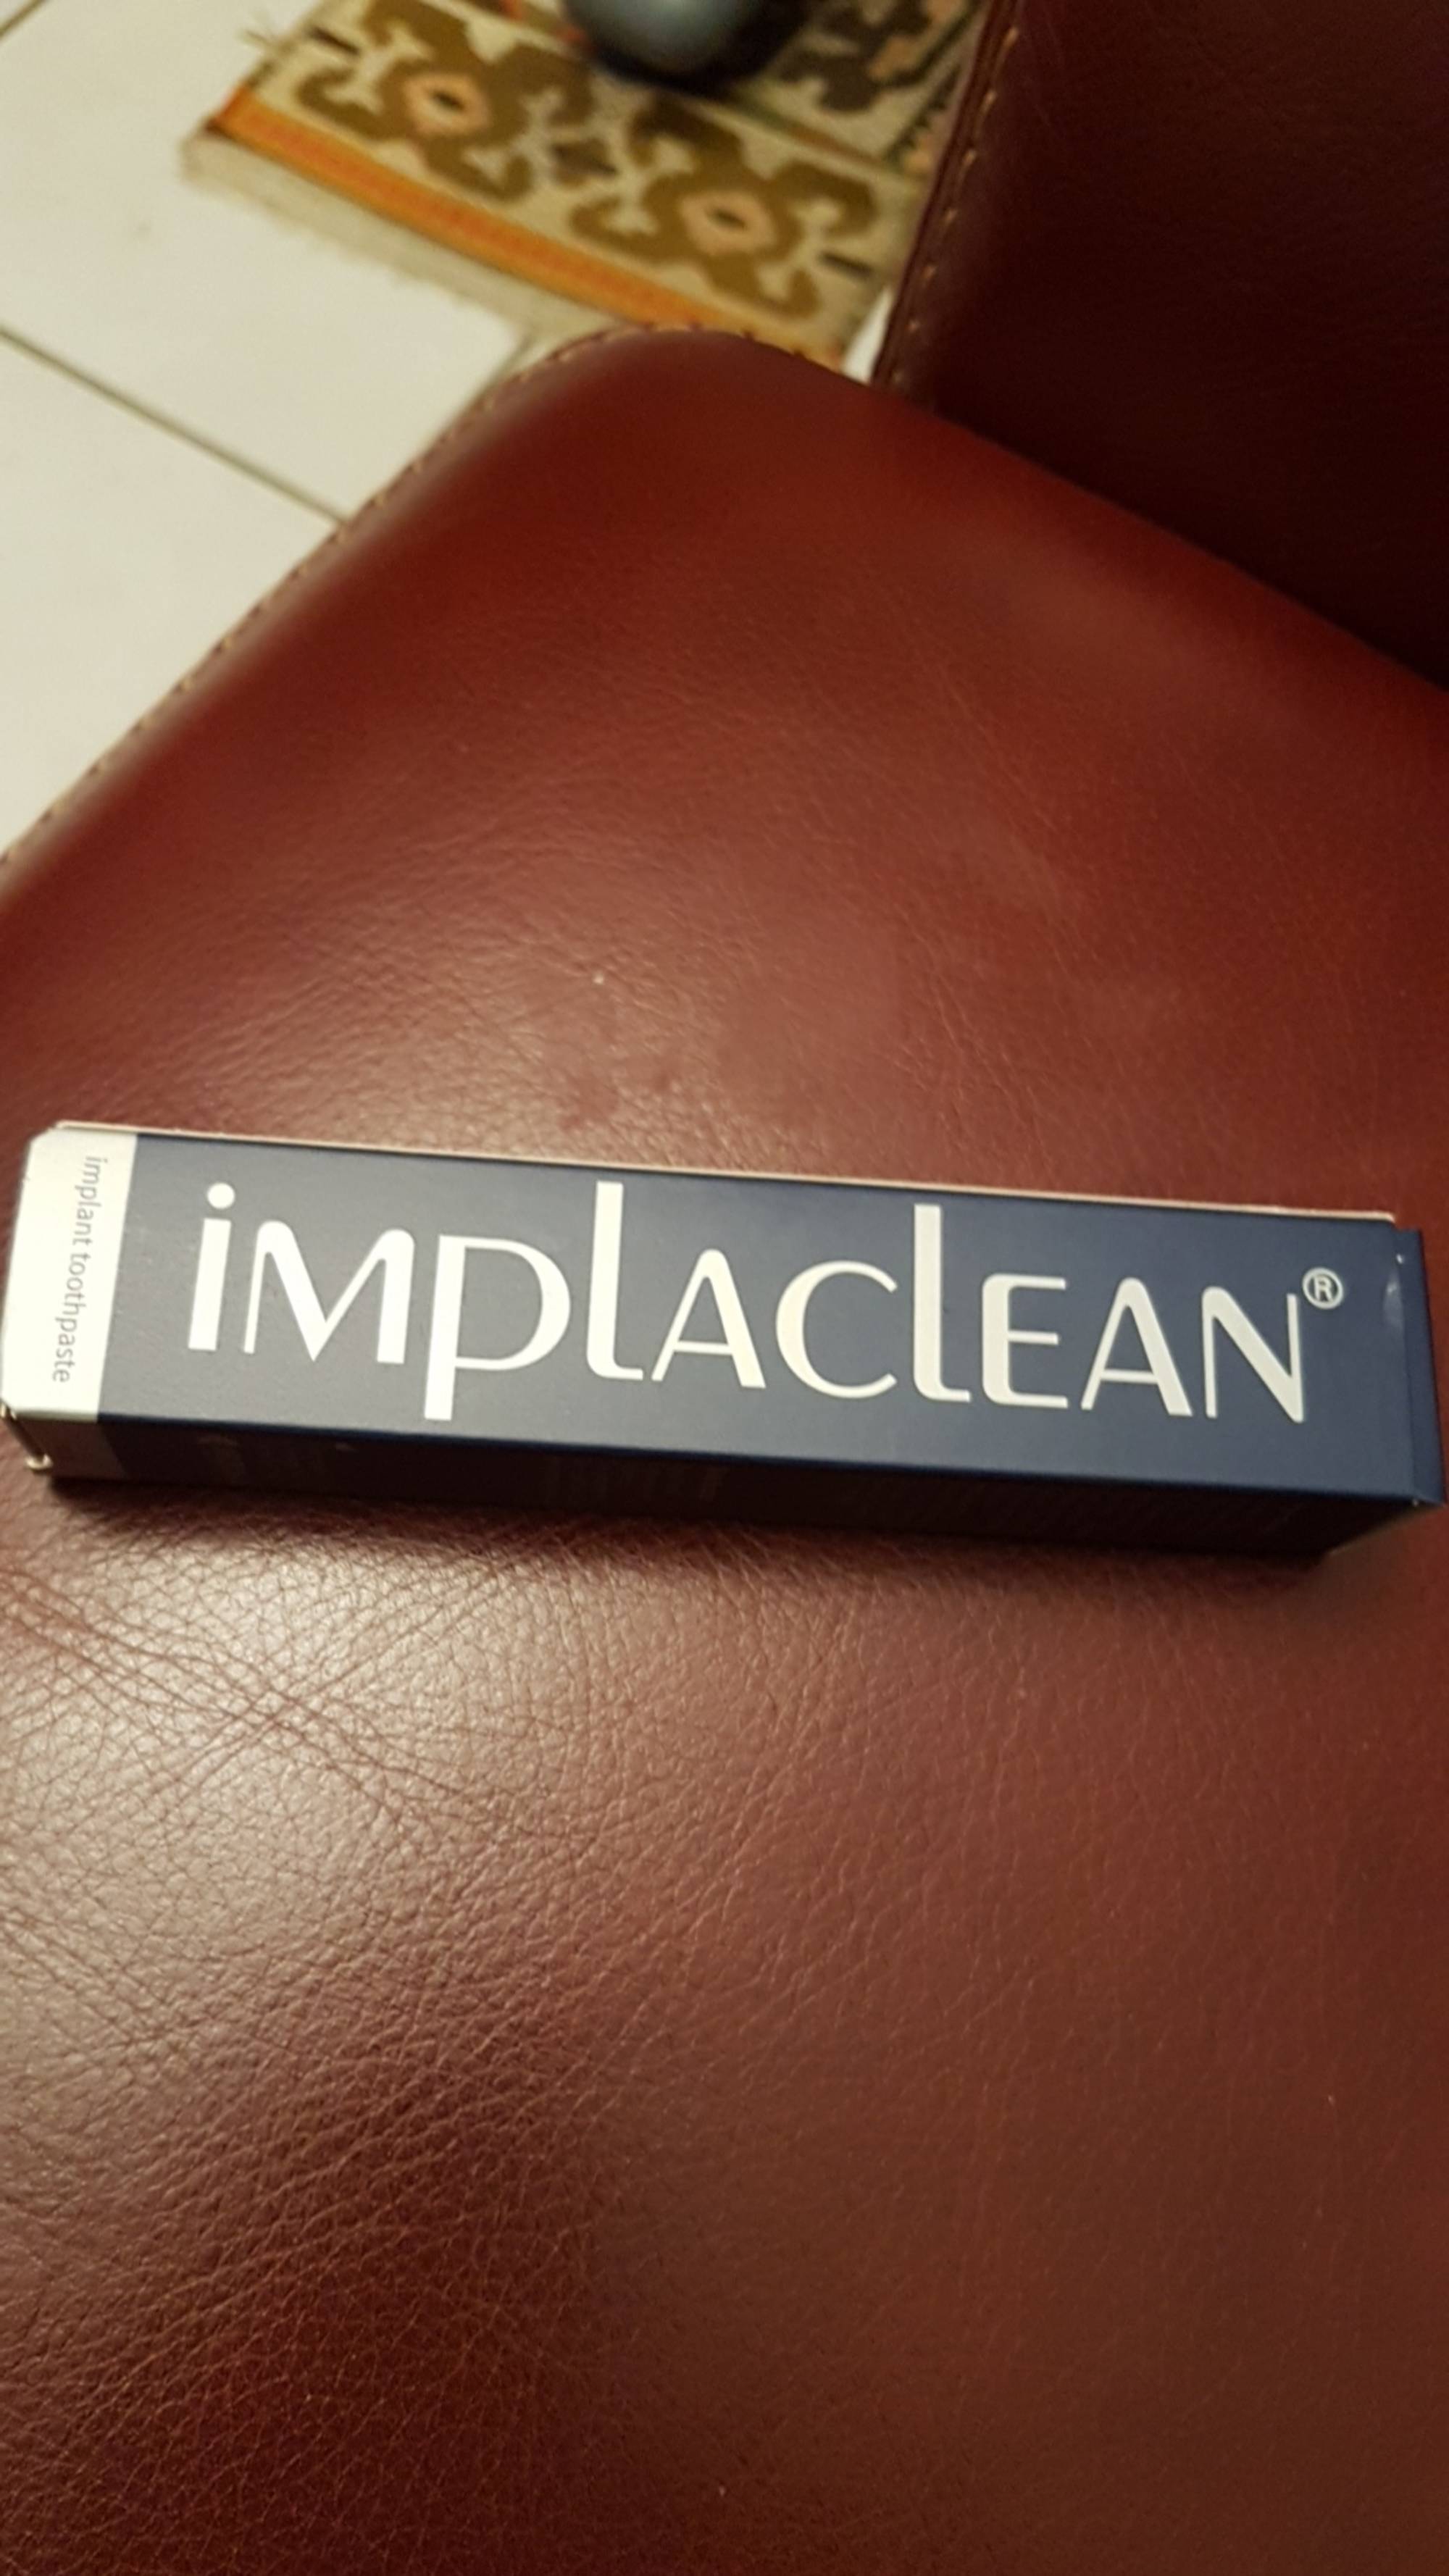 IMPLACLEAN - Implant toophpaste